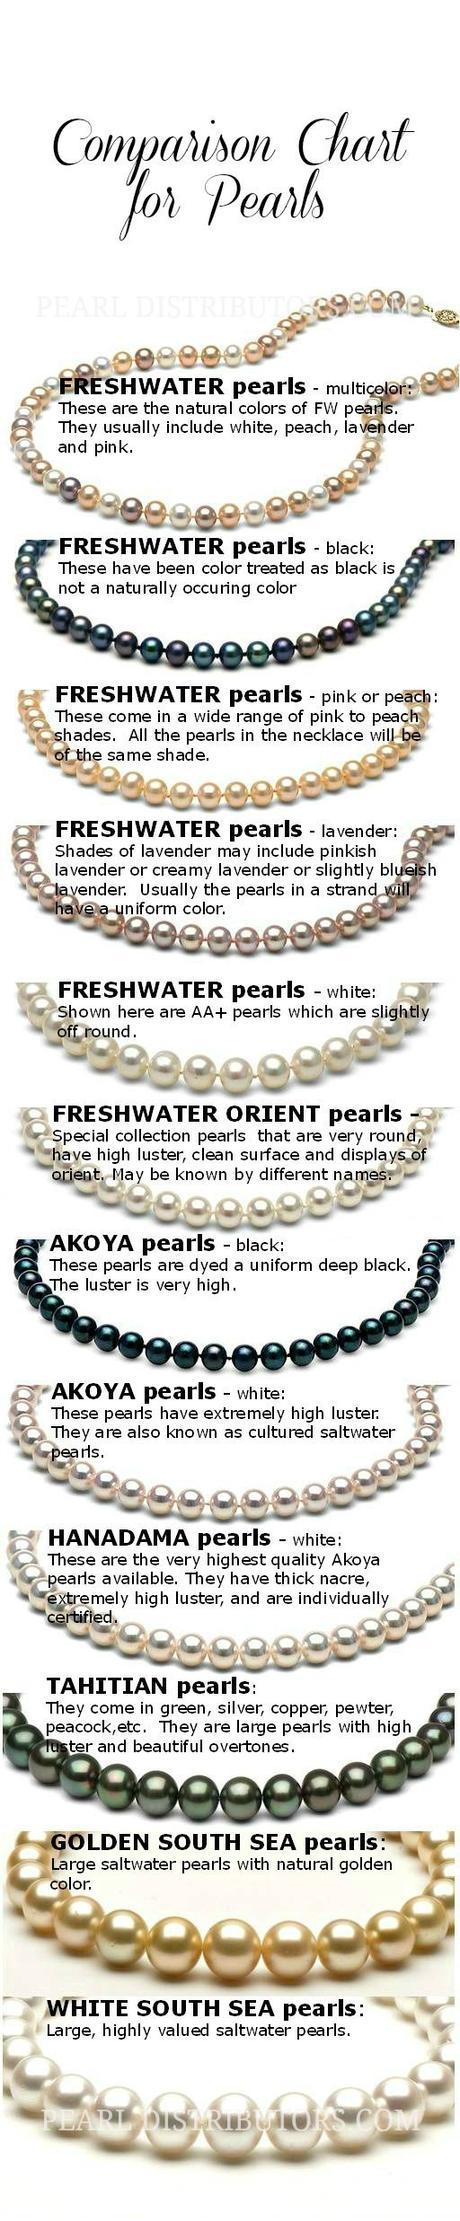 Pearl types and colors